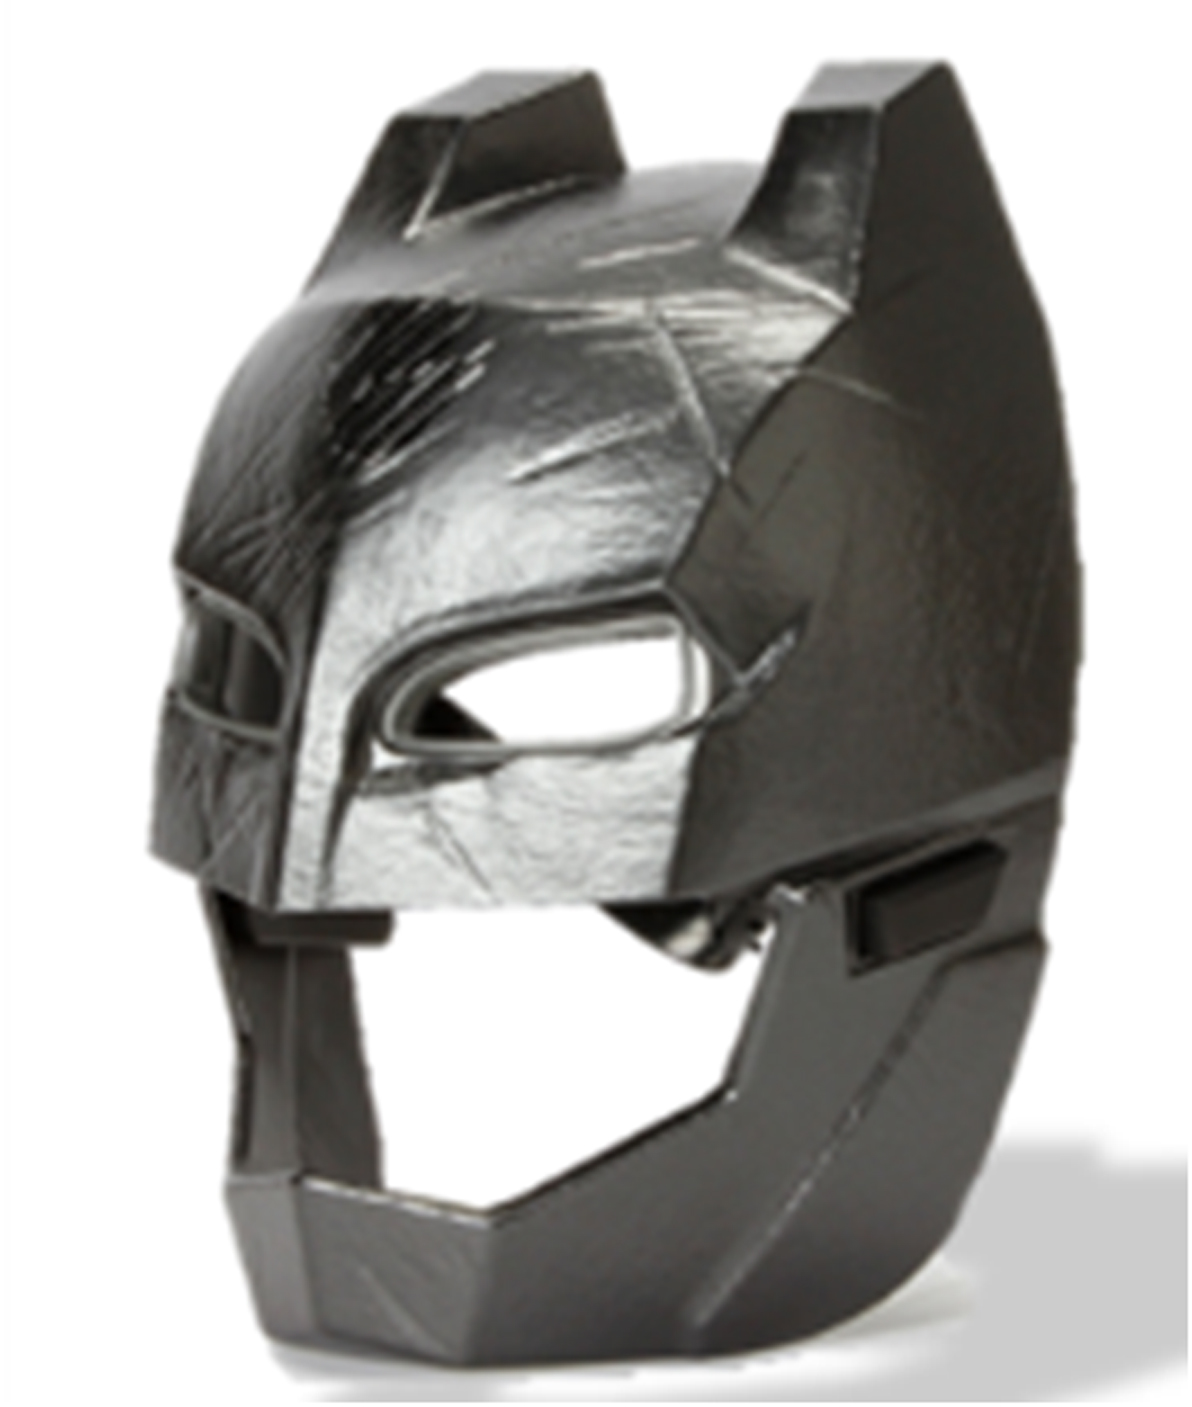 Batman Voice Changer Helmet: Features light up eyes and push button sounds and phrases. Activate the integrated voice changer to make yourself sound like Batman from the film.